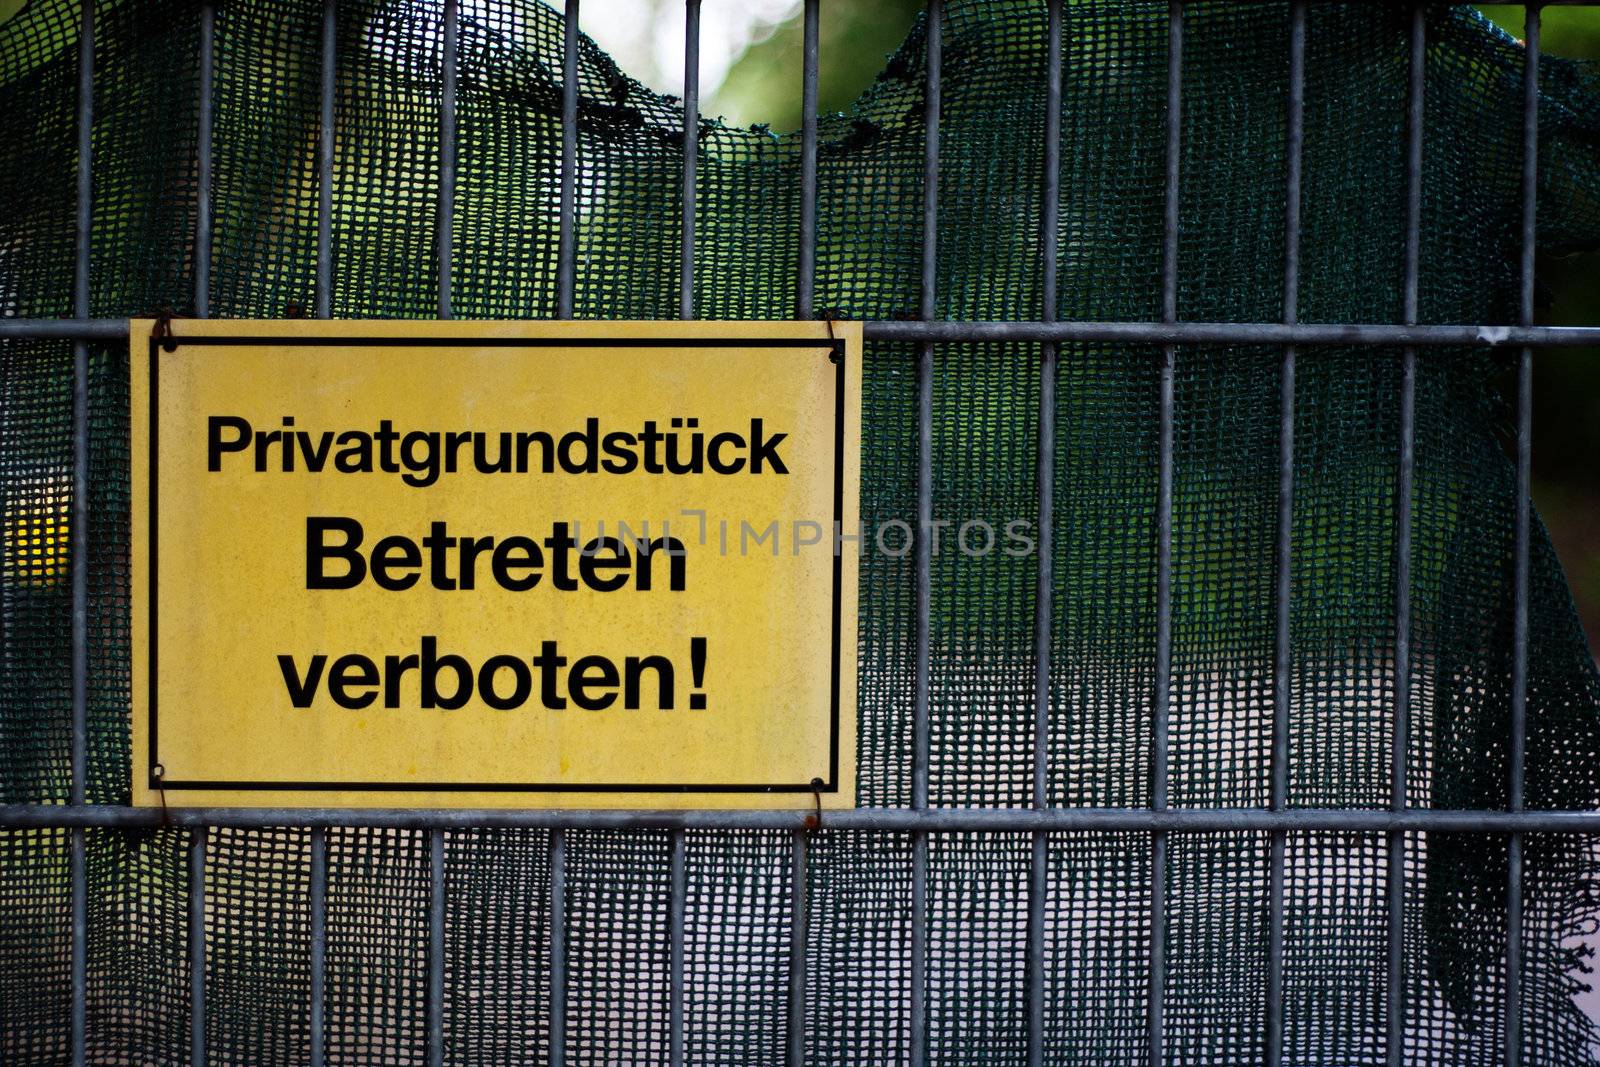 Fence with sign showing the german term for private property - no trespassing.